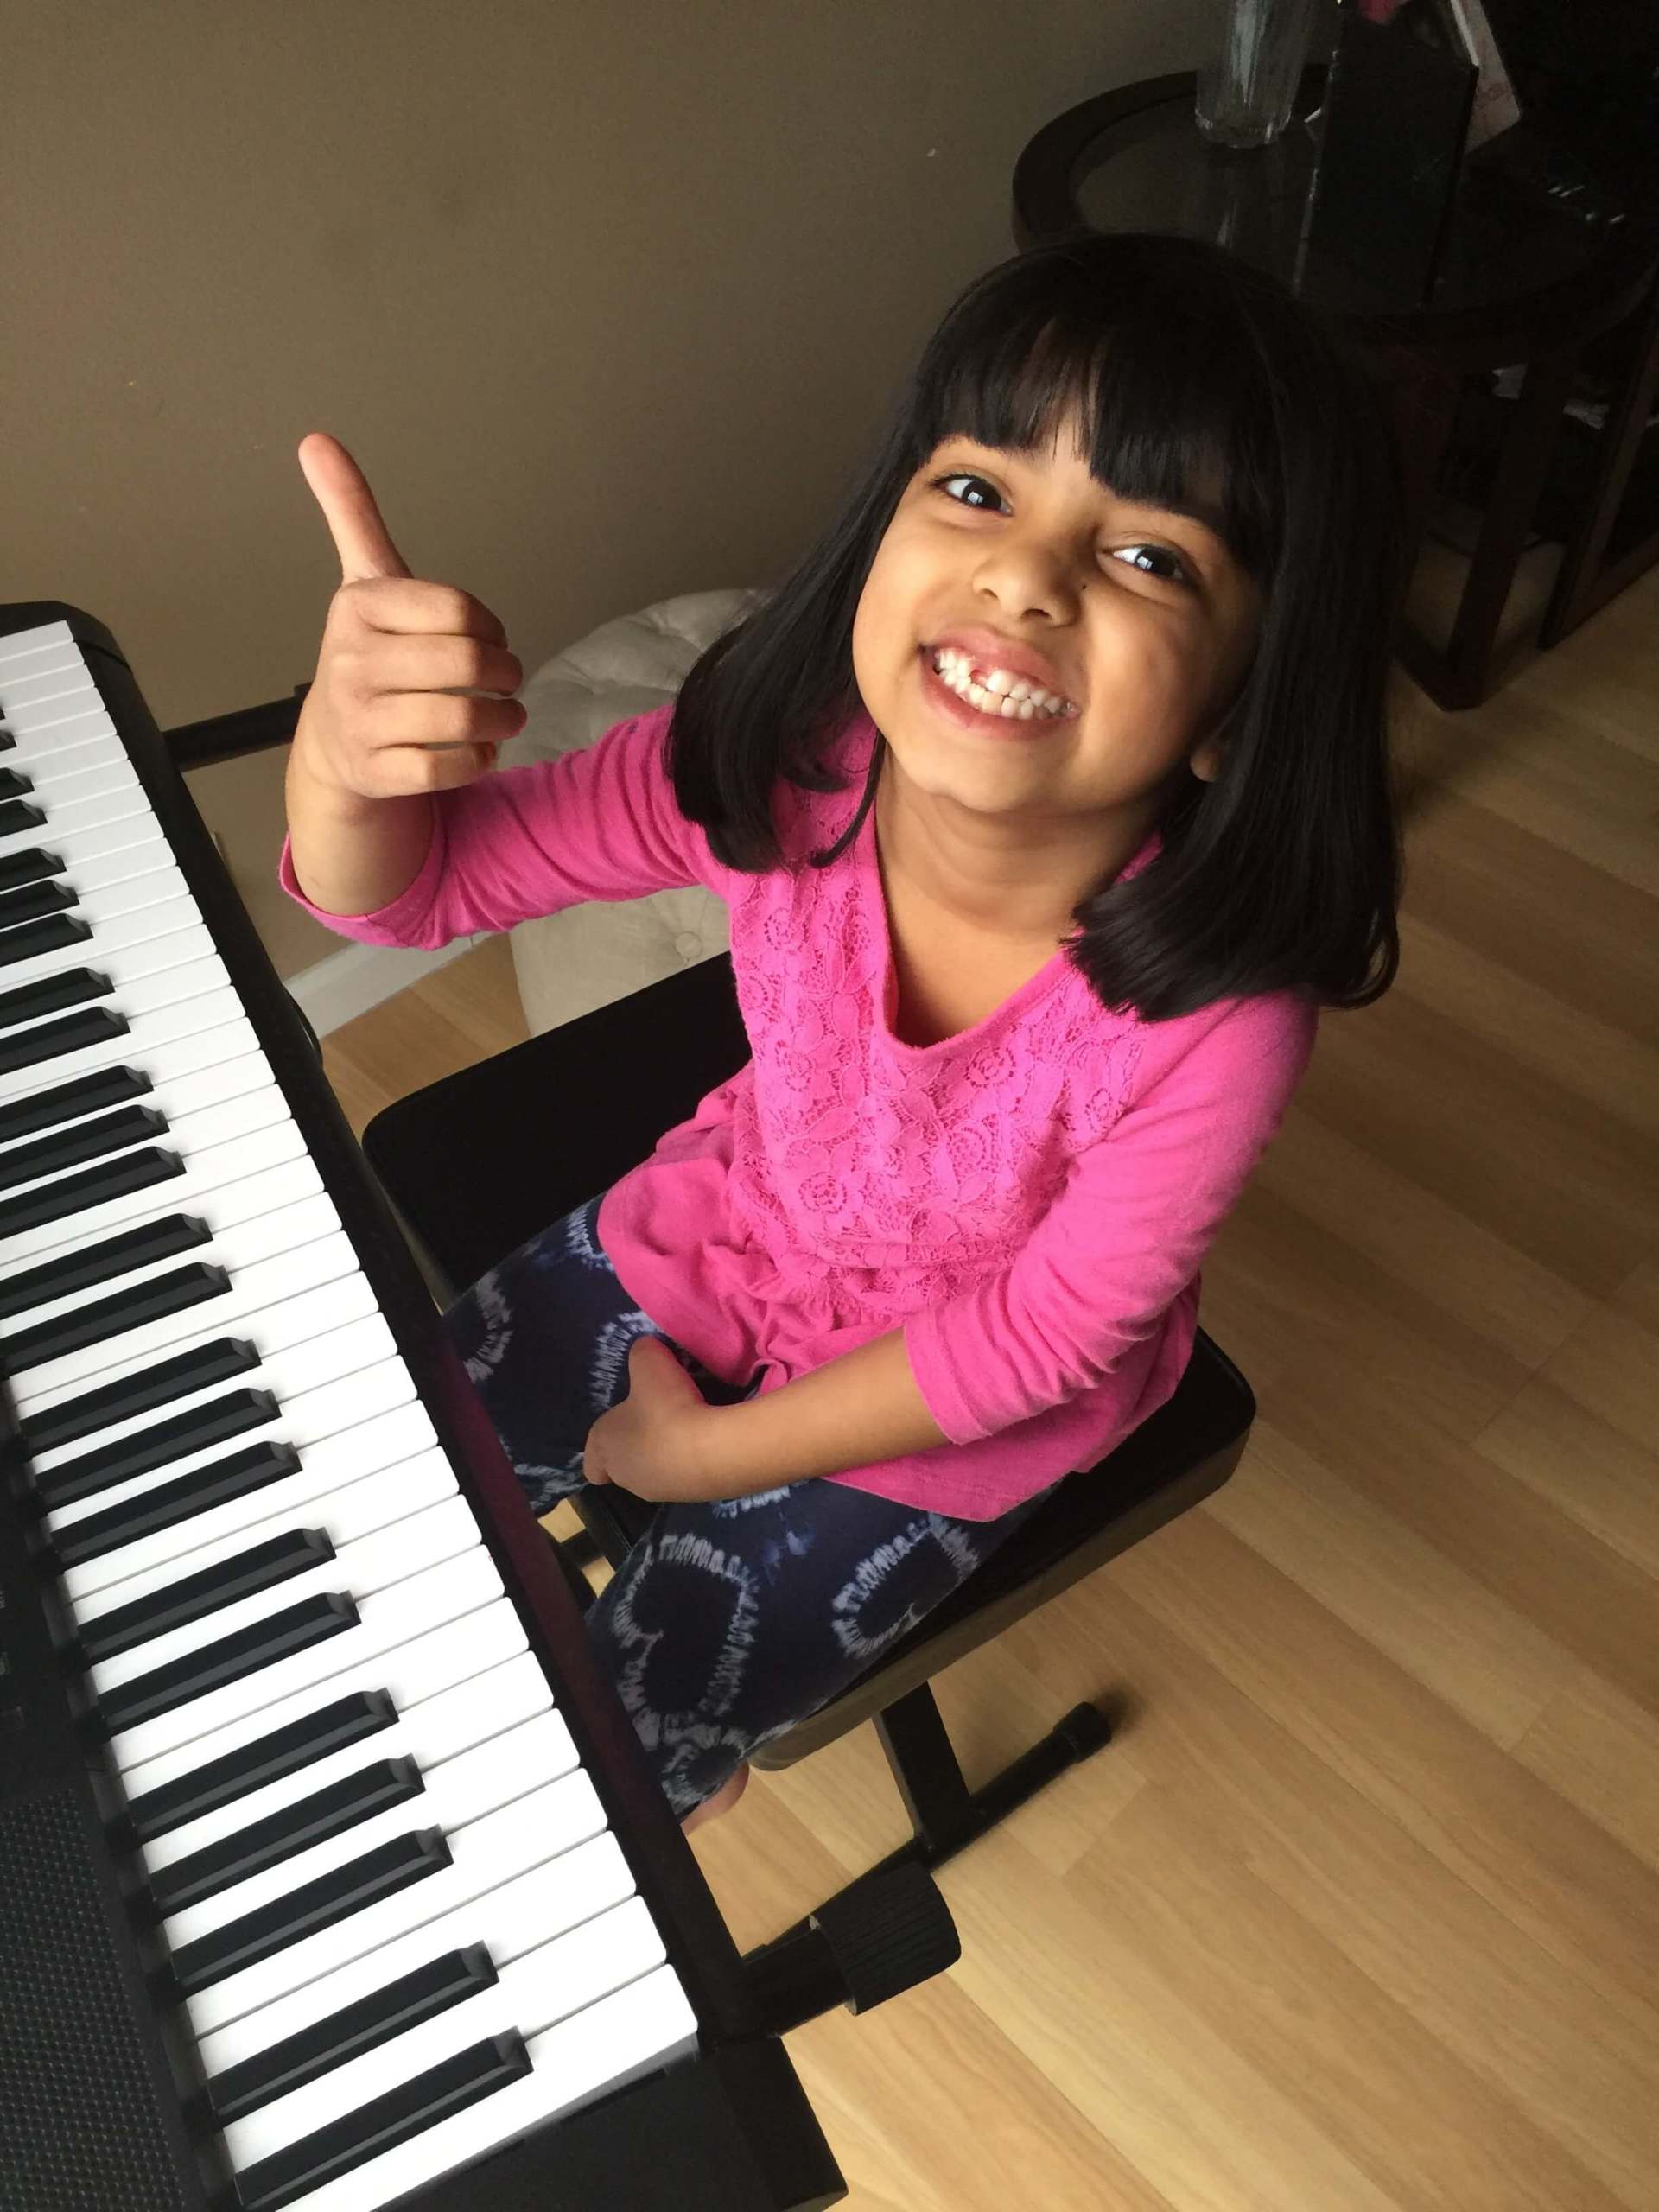 Girl on Pink Dress Playing Piano — A Plus In Home Guitar Lessons — Arlighton Heights, IL